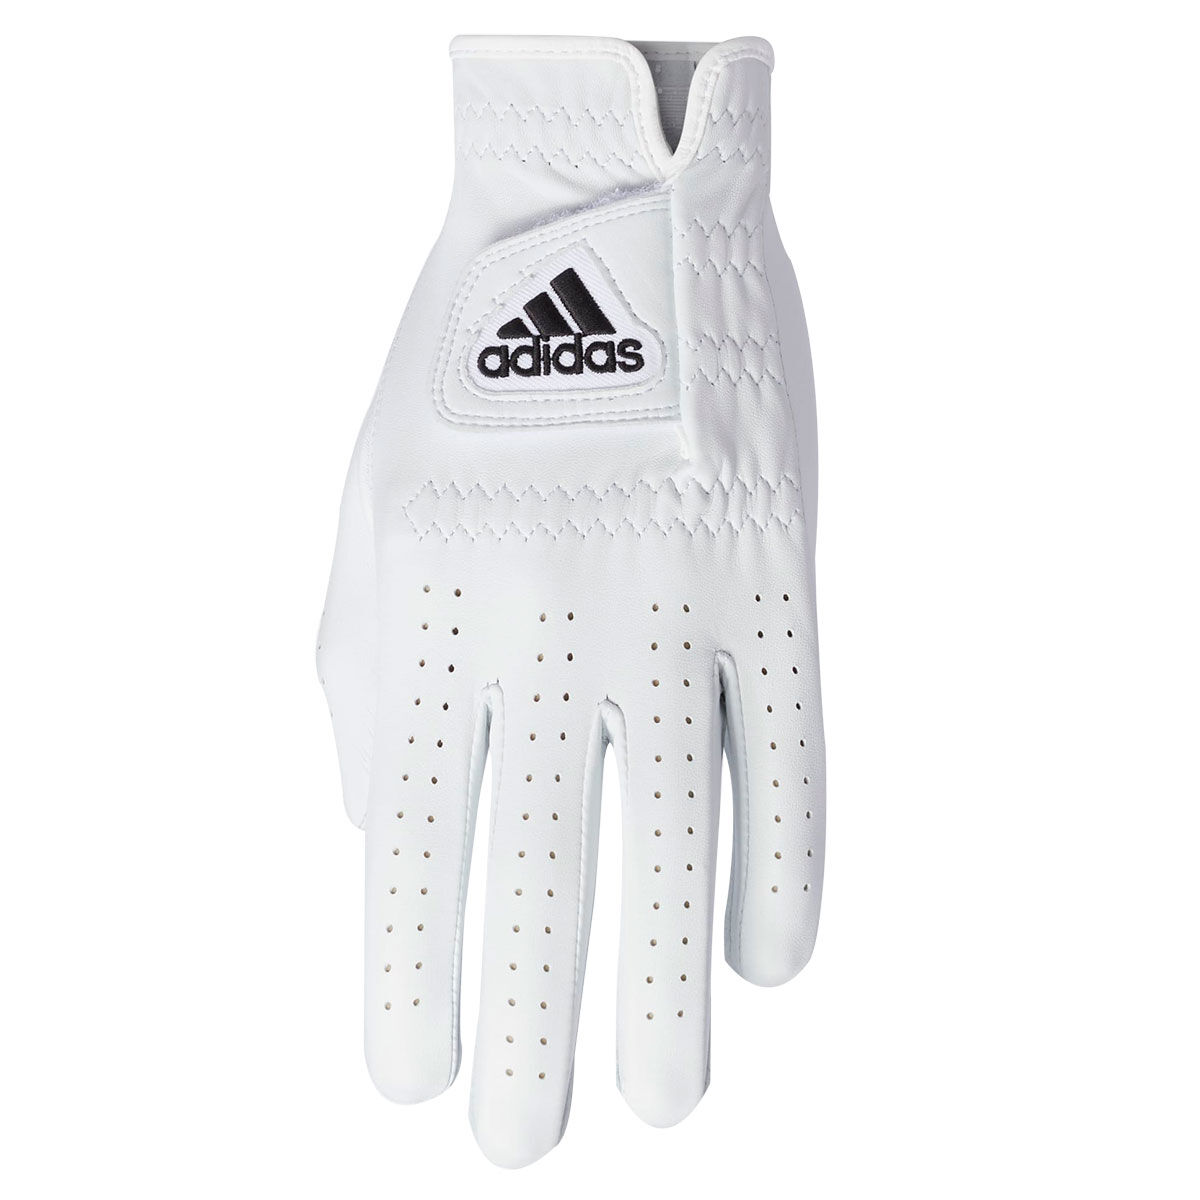 adidas Men's Leather Golf Glove from golf